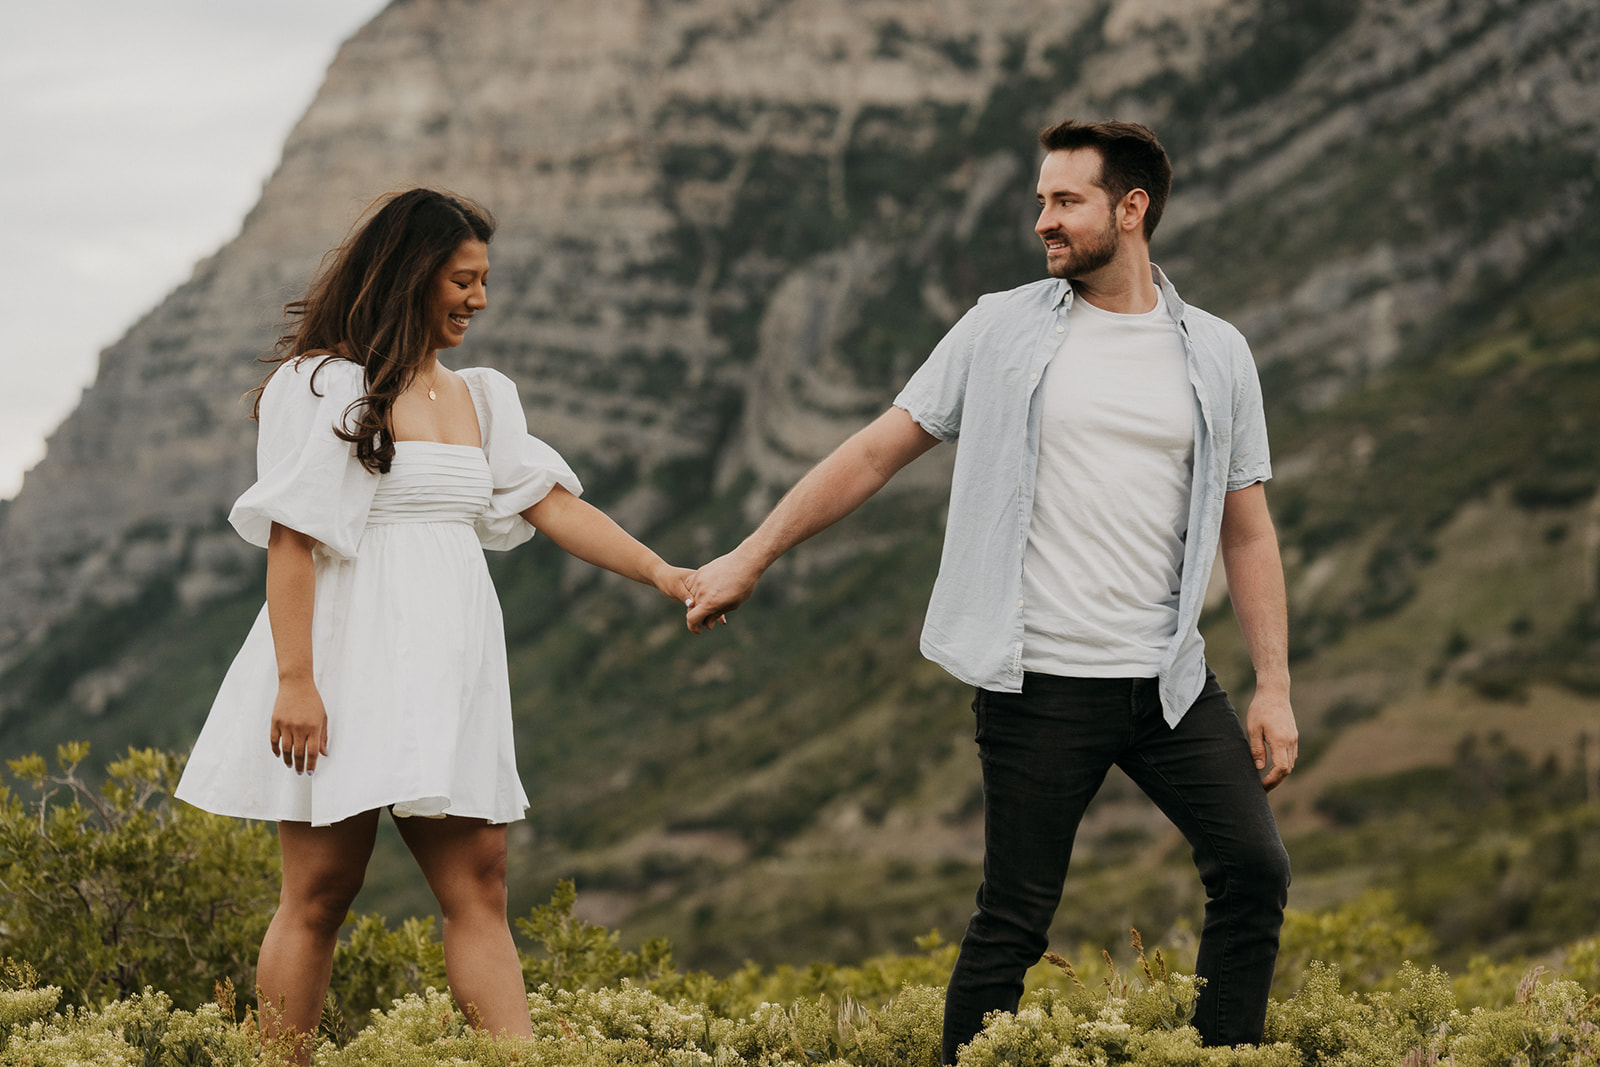 A man leads his fiancee through a mountain trail while holding hands in a white dress